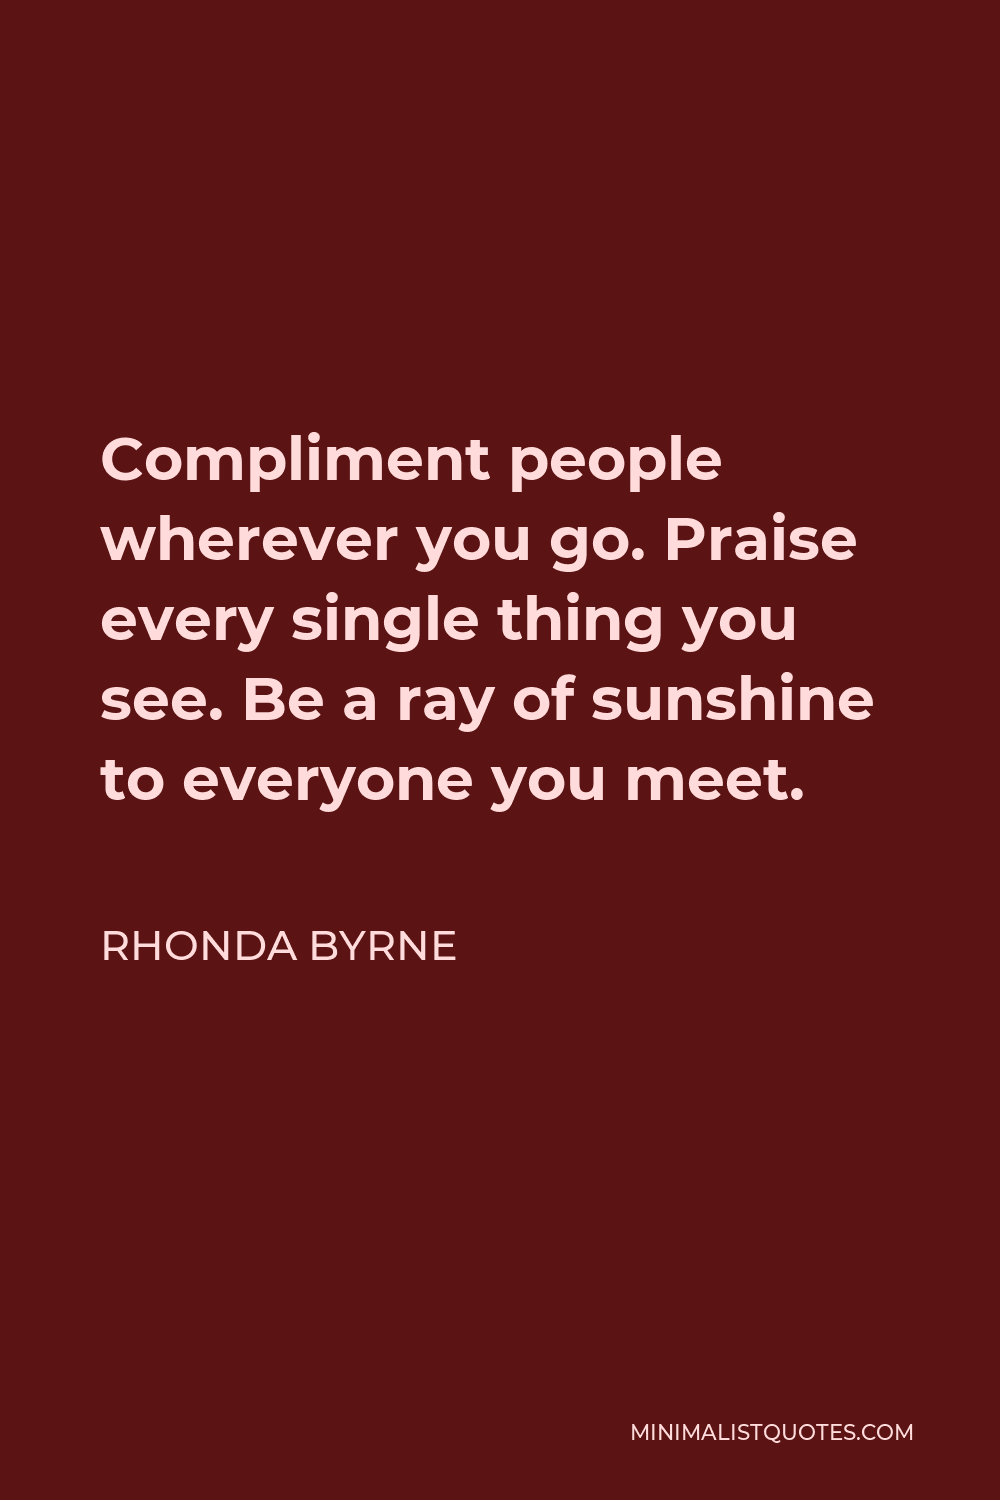 Rhonda Byrne Quote - Compliment people wherever you go. Praise every single thing you see. Be a ray of sunshine to everyone you meet.